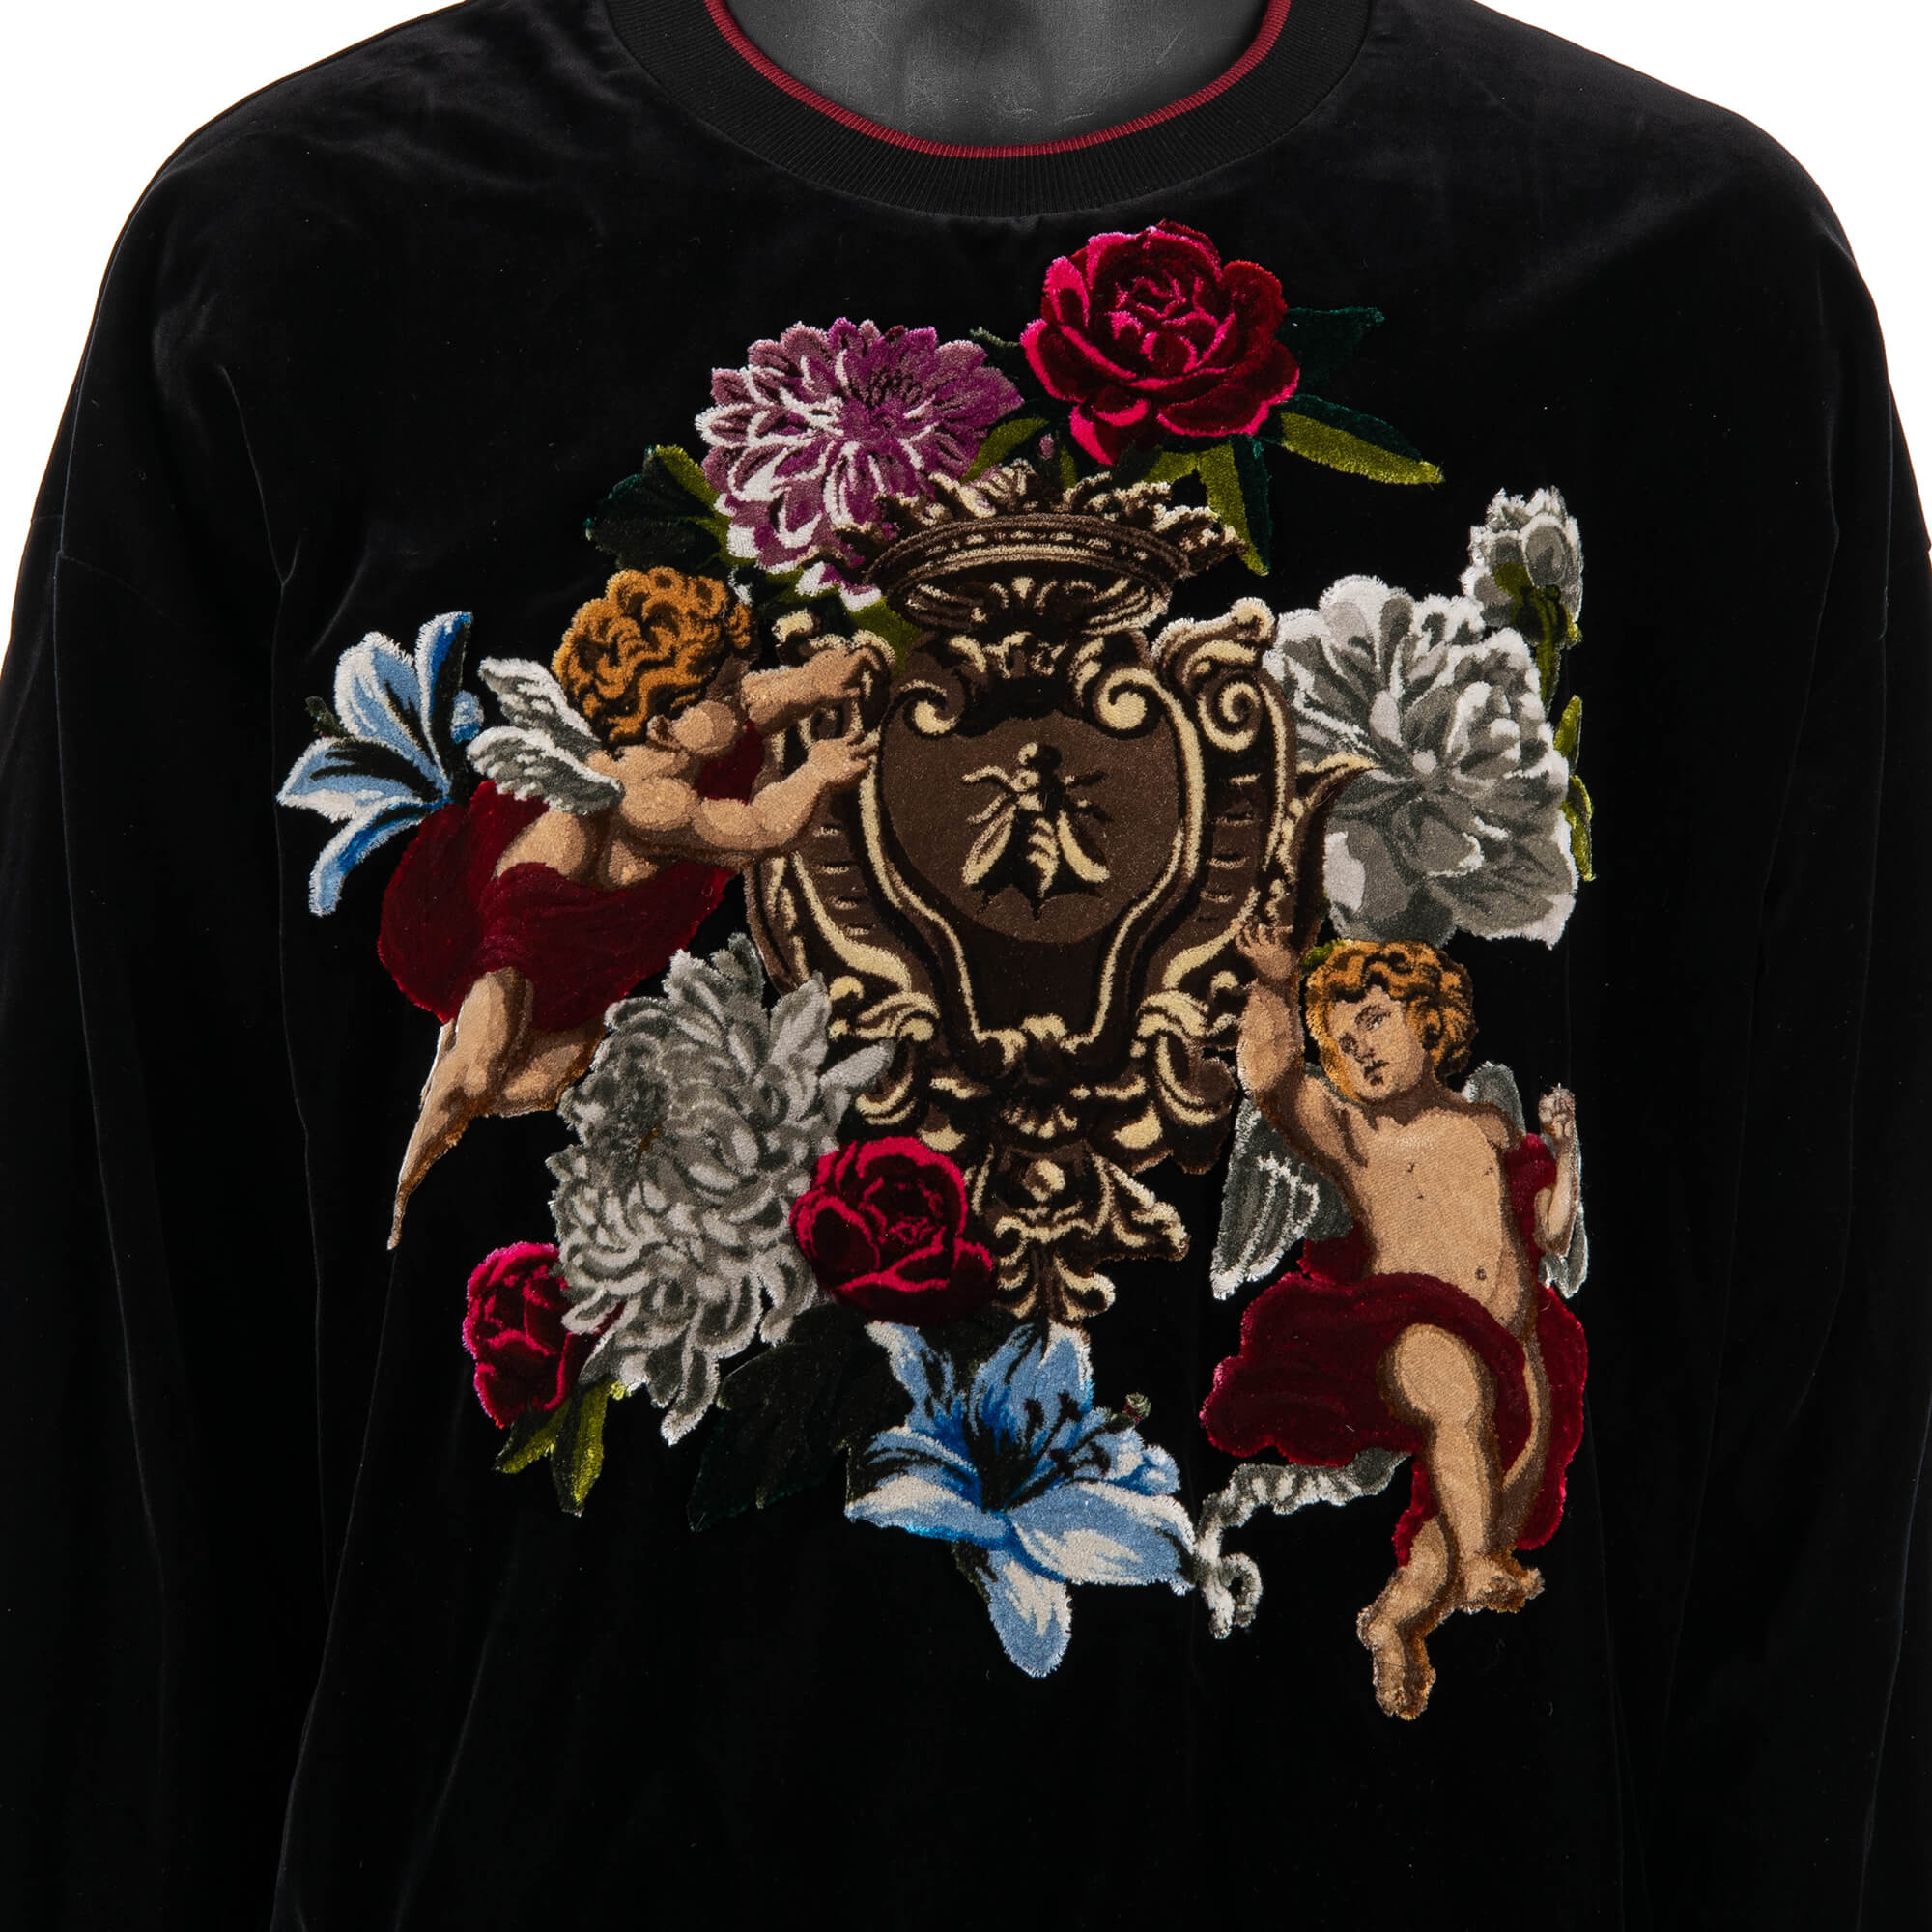 Velvet-Sweater-with-Baroque-Angels-and-Flowers-Application-Black-Red-5.jpg